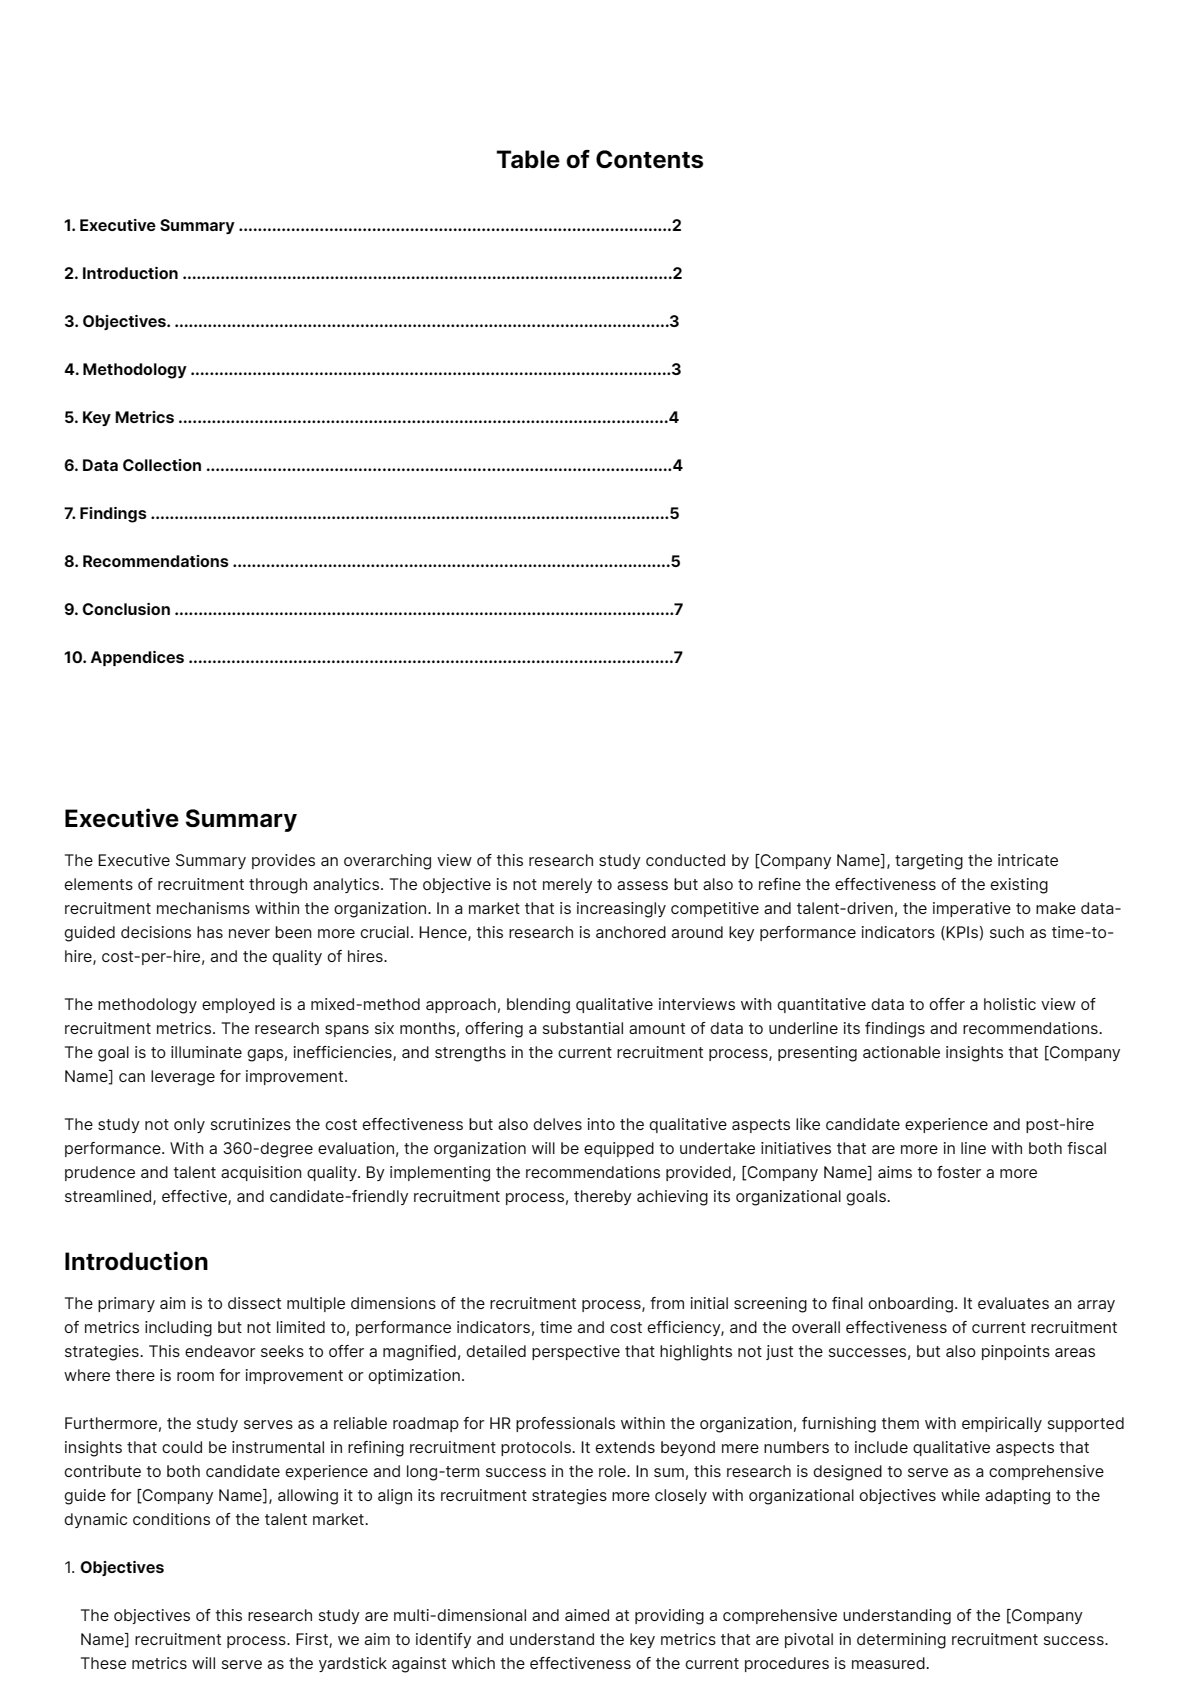 Free Recruitment Analytics Research HR Template